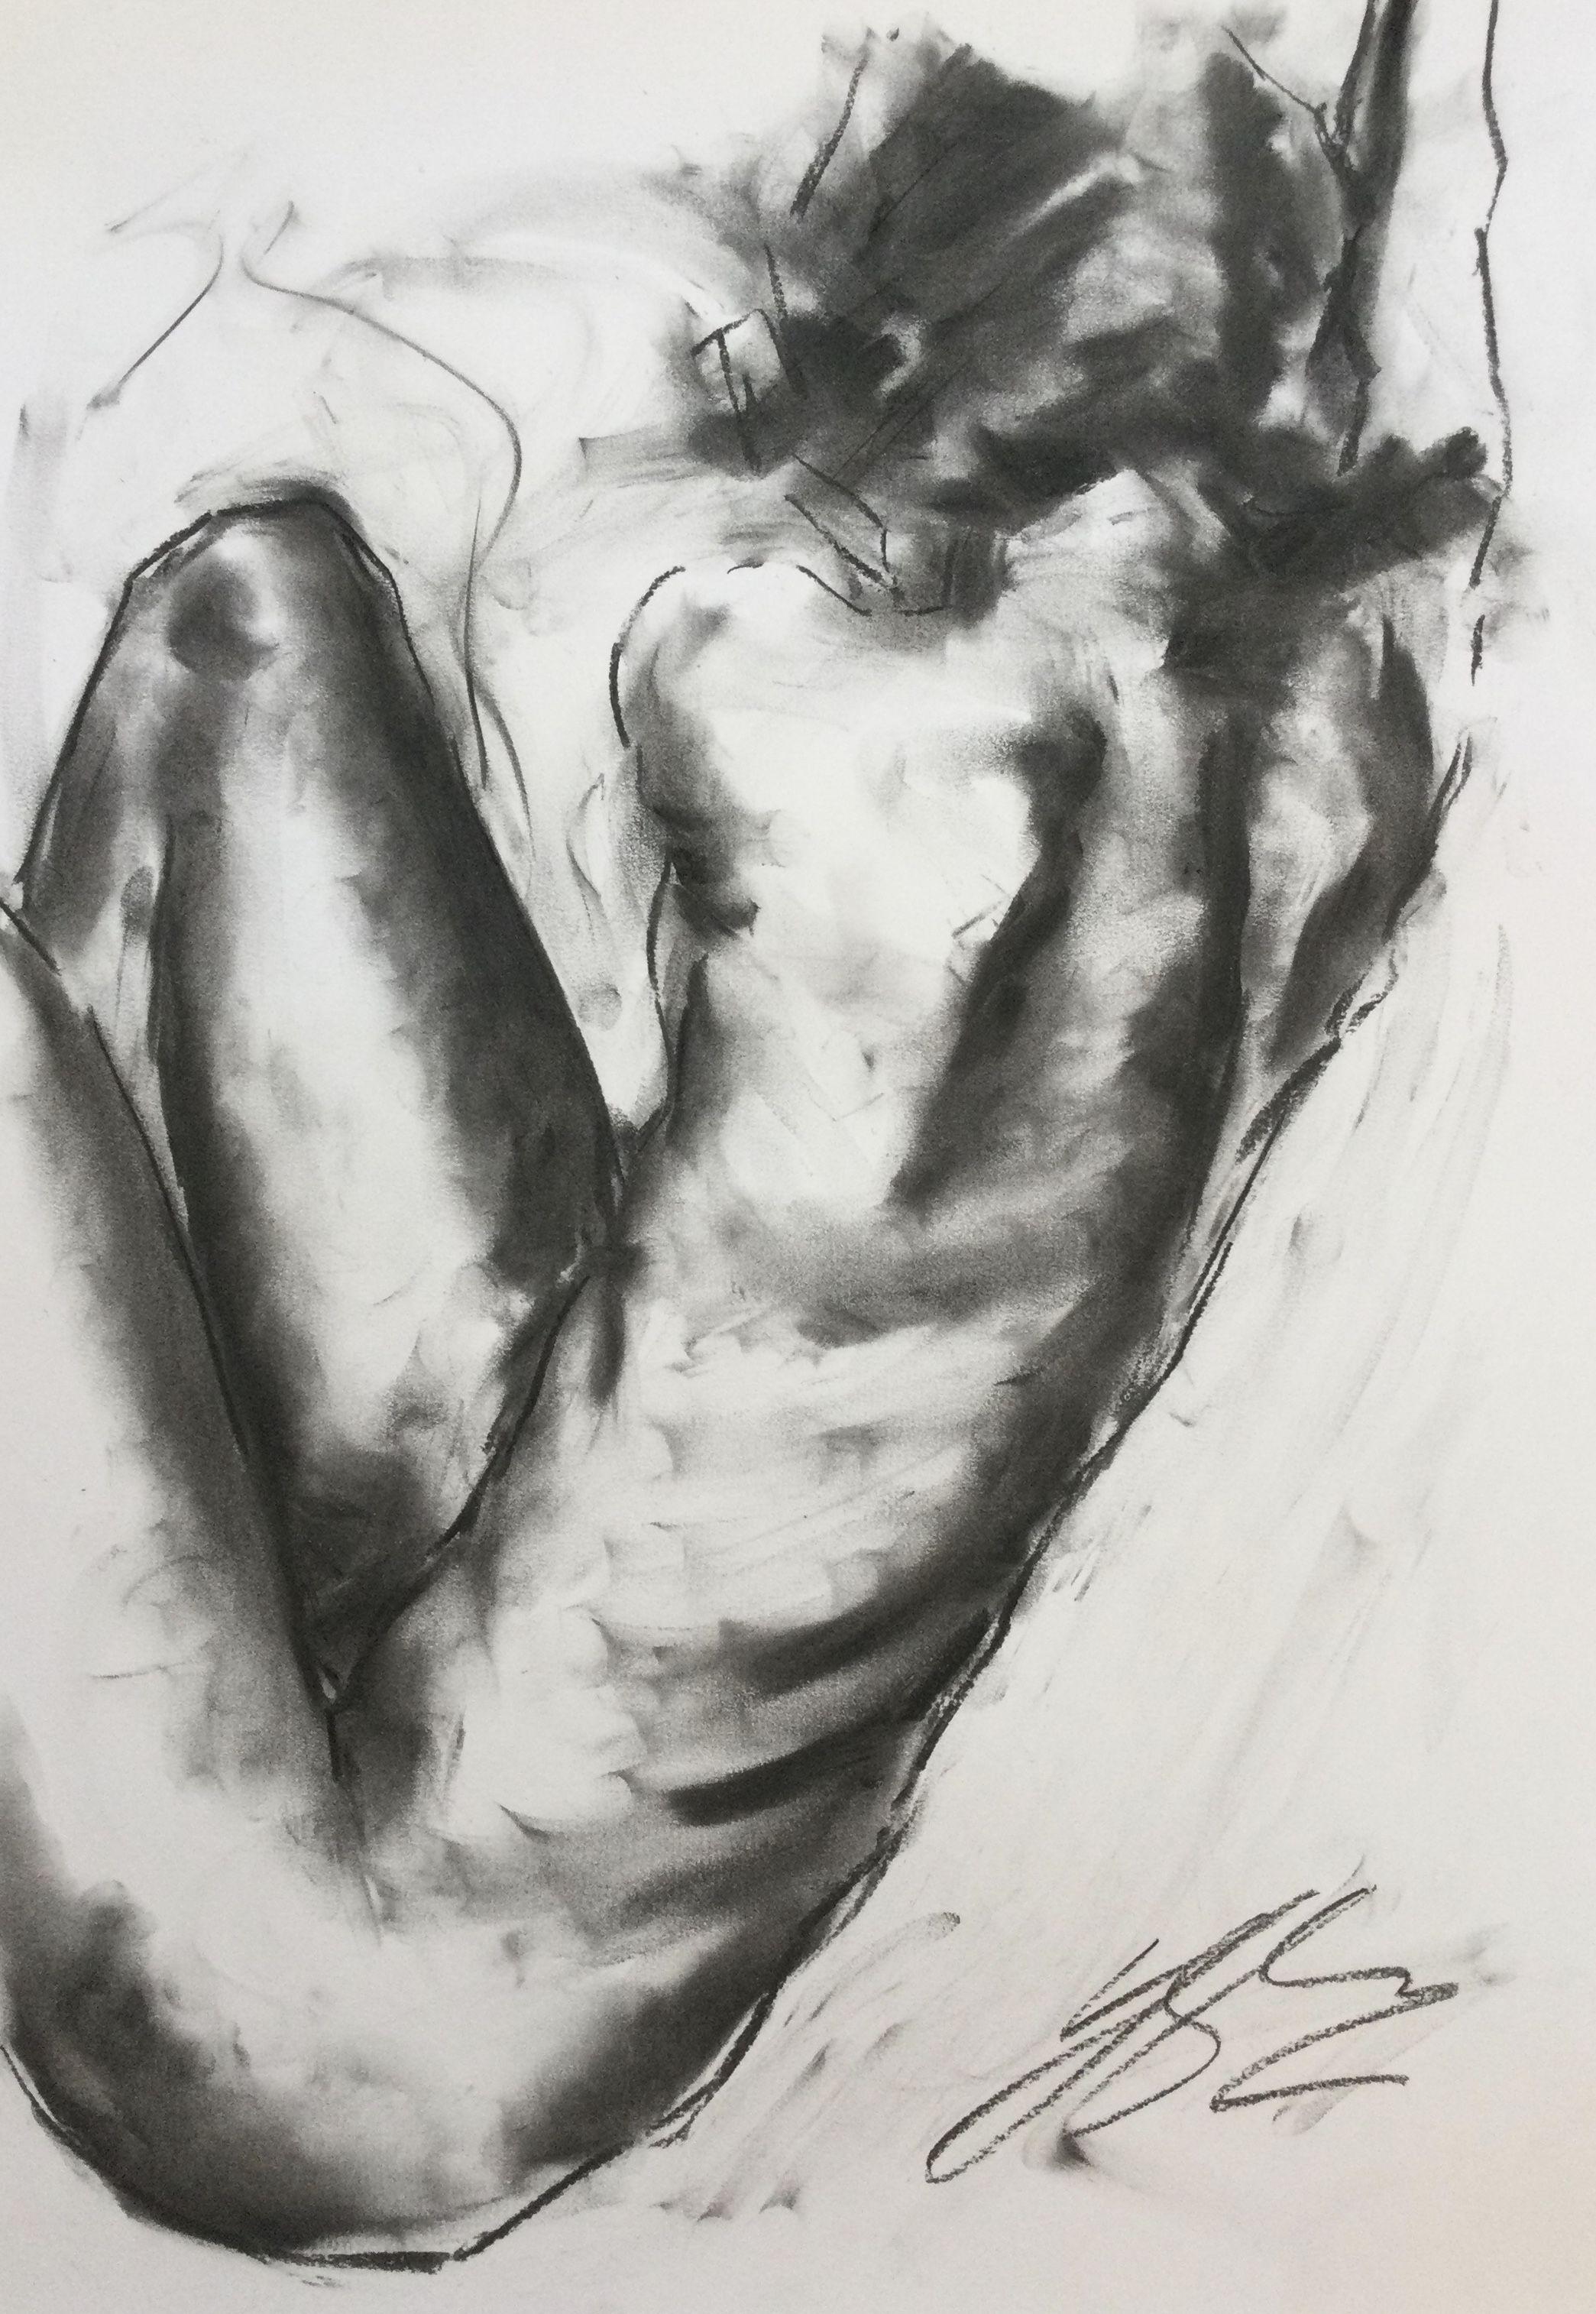 Timeless, Drawing, Charcoal on Paper - Art by James Shipton